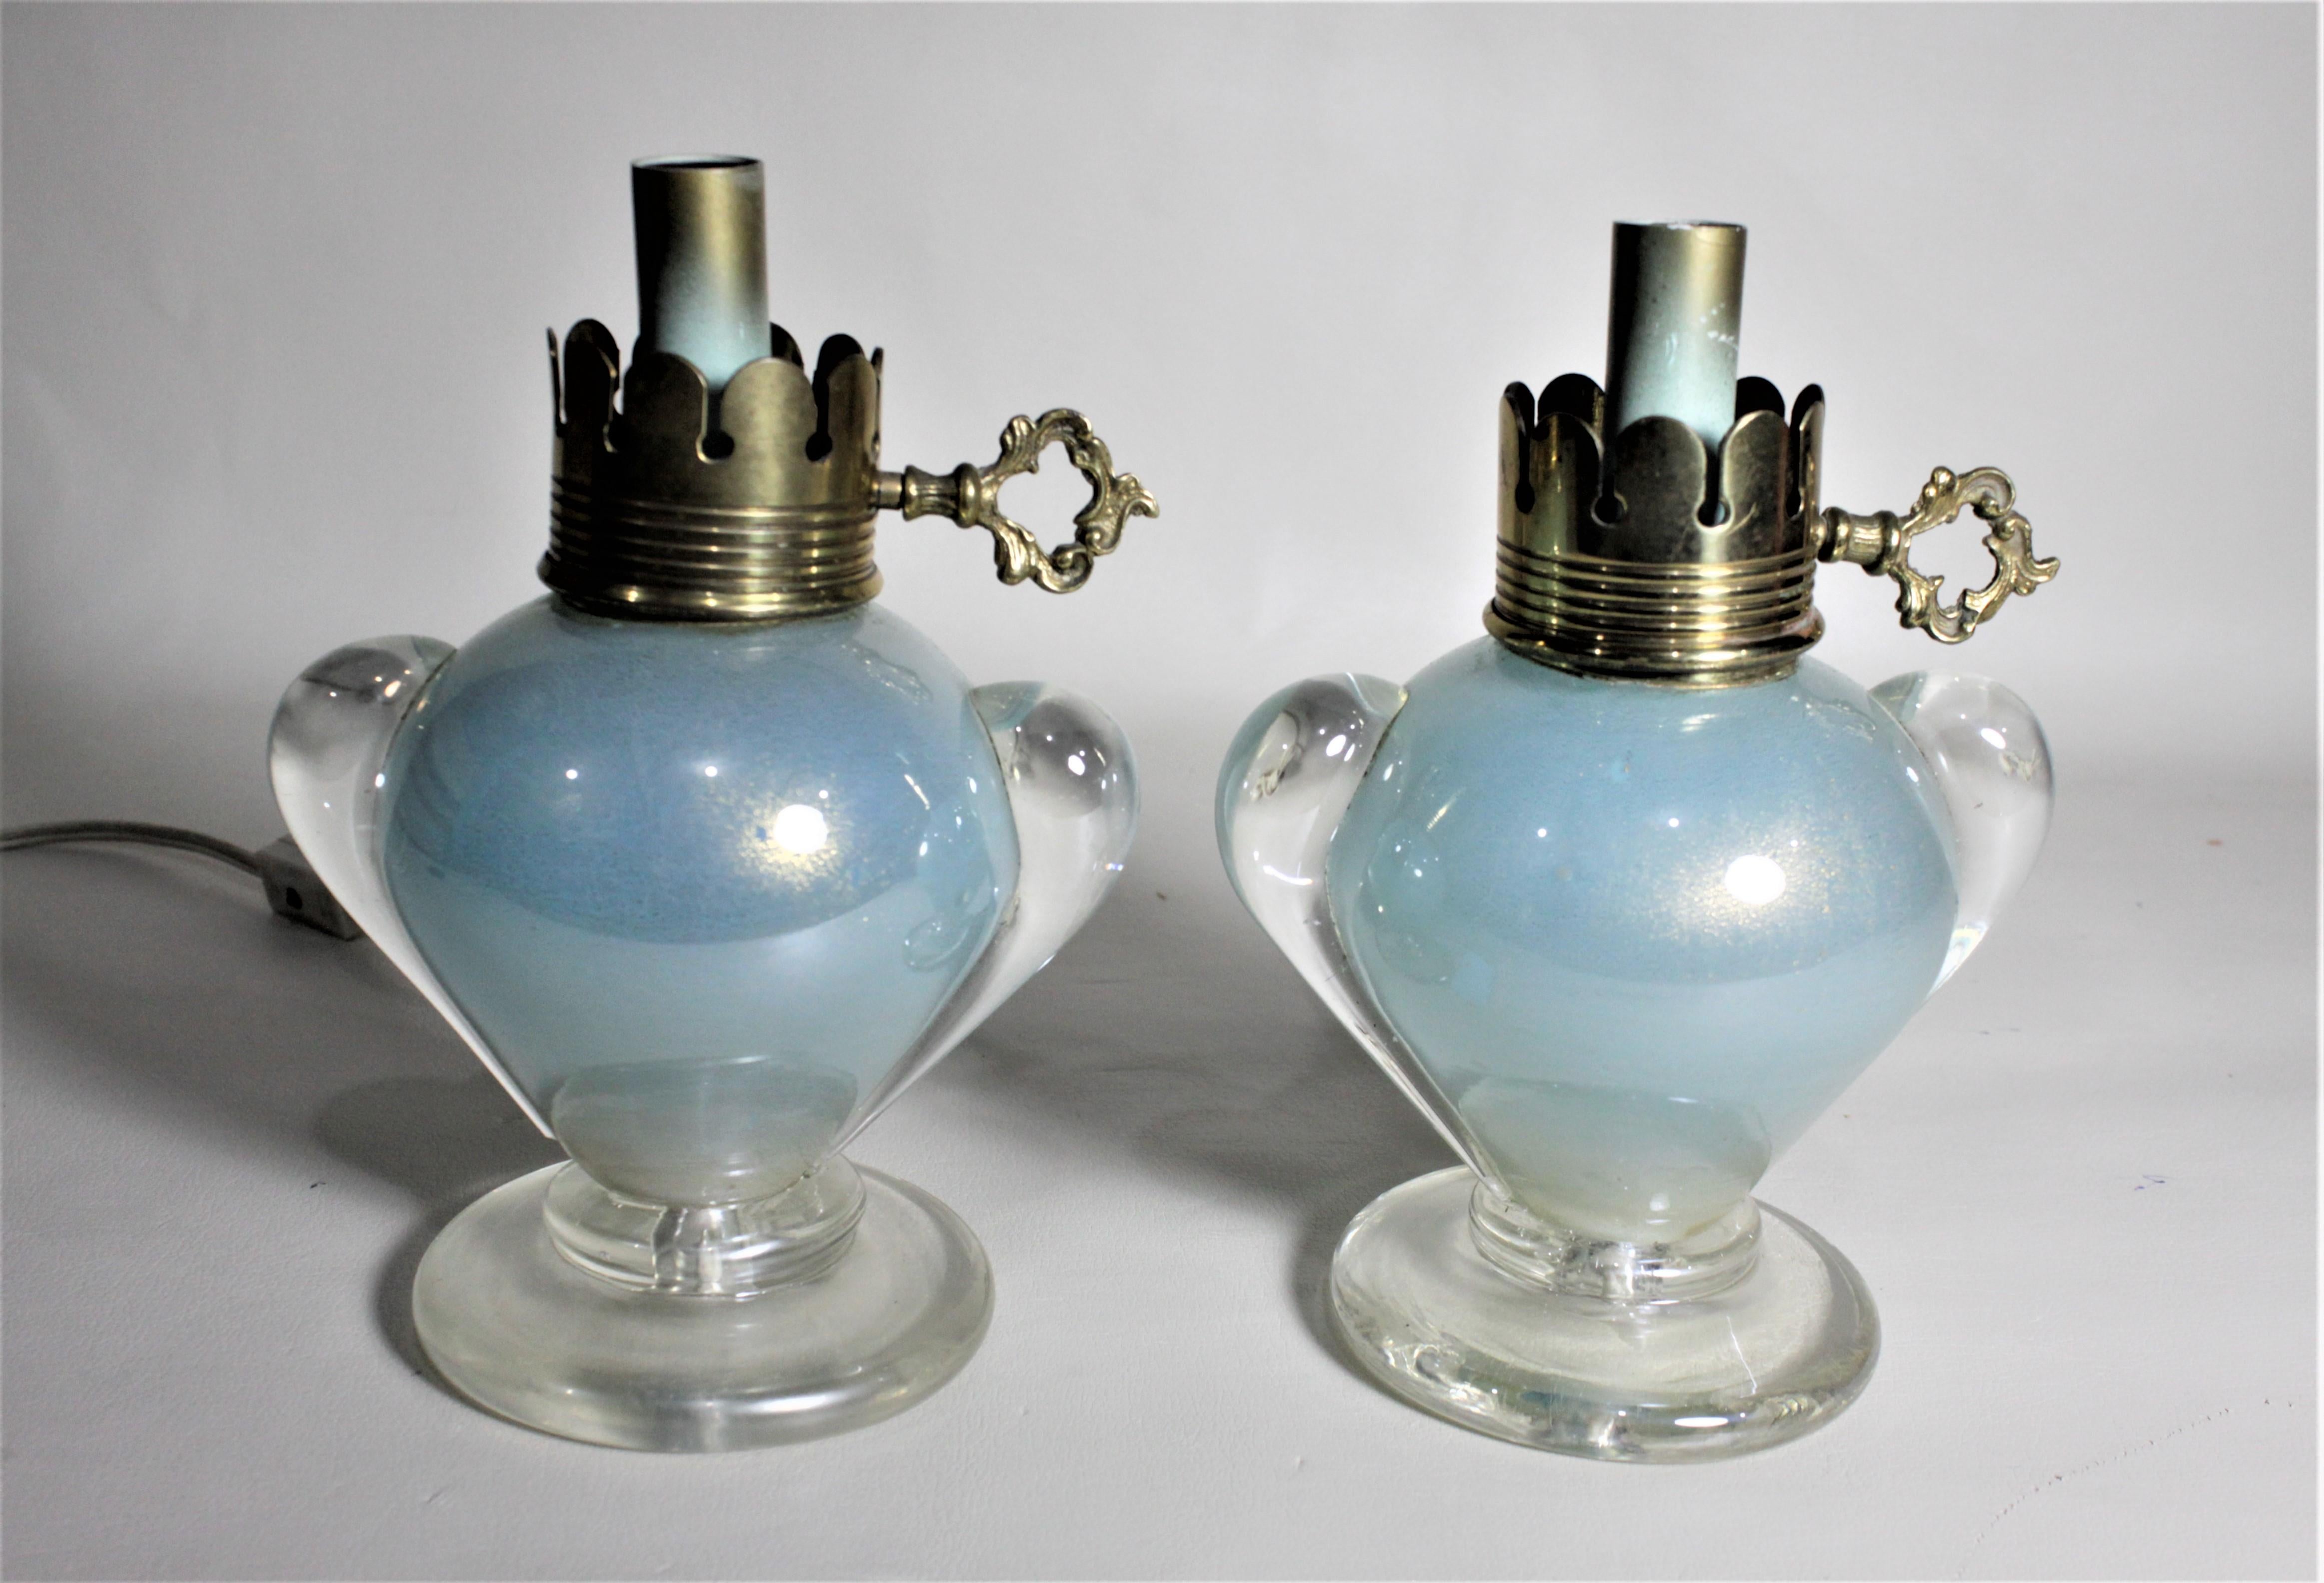 This pair of small lantern styled art glass table lamps are unsigned, but are presumed to have been made in Italy and designed by Angelo Seguso in circa 1970. The two lamps are done in a thick clear art glass with aqua blue inclusions with swirled